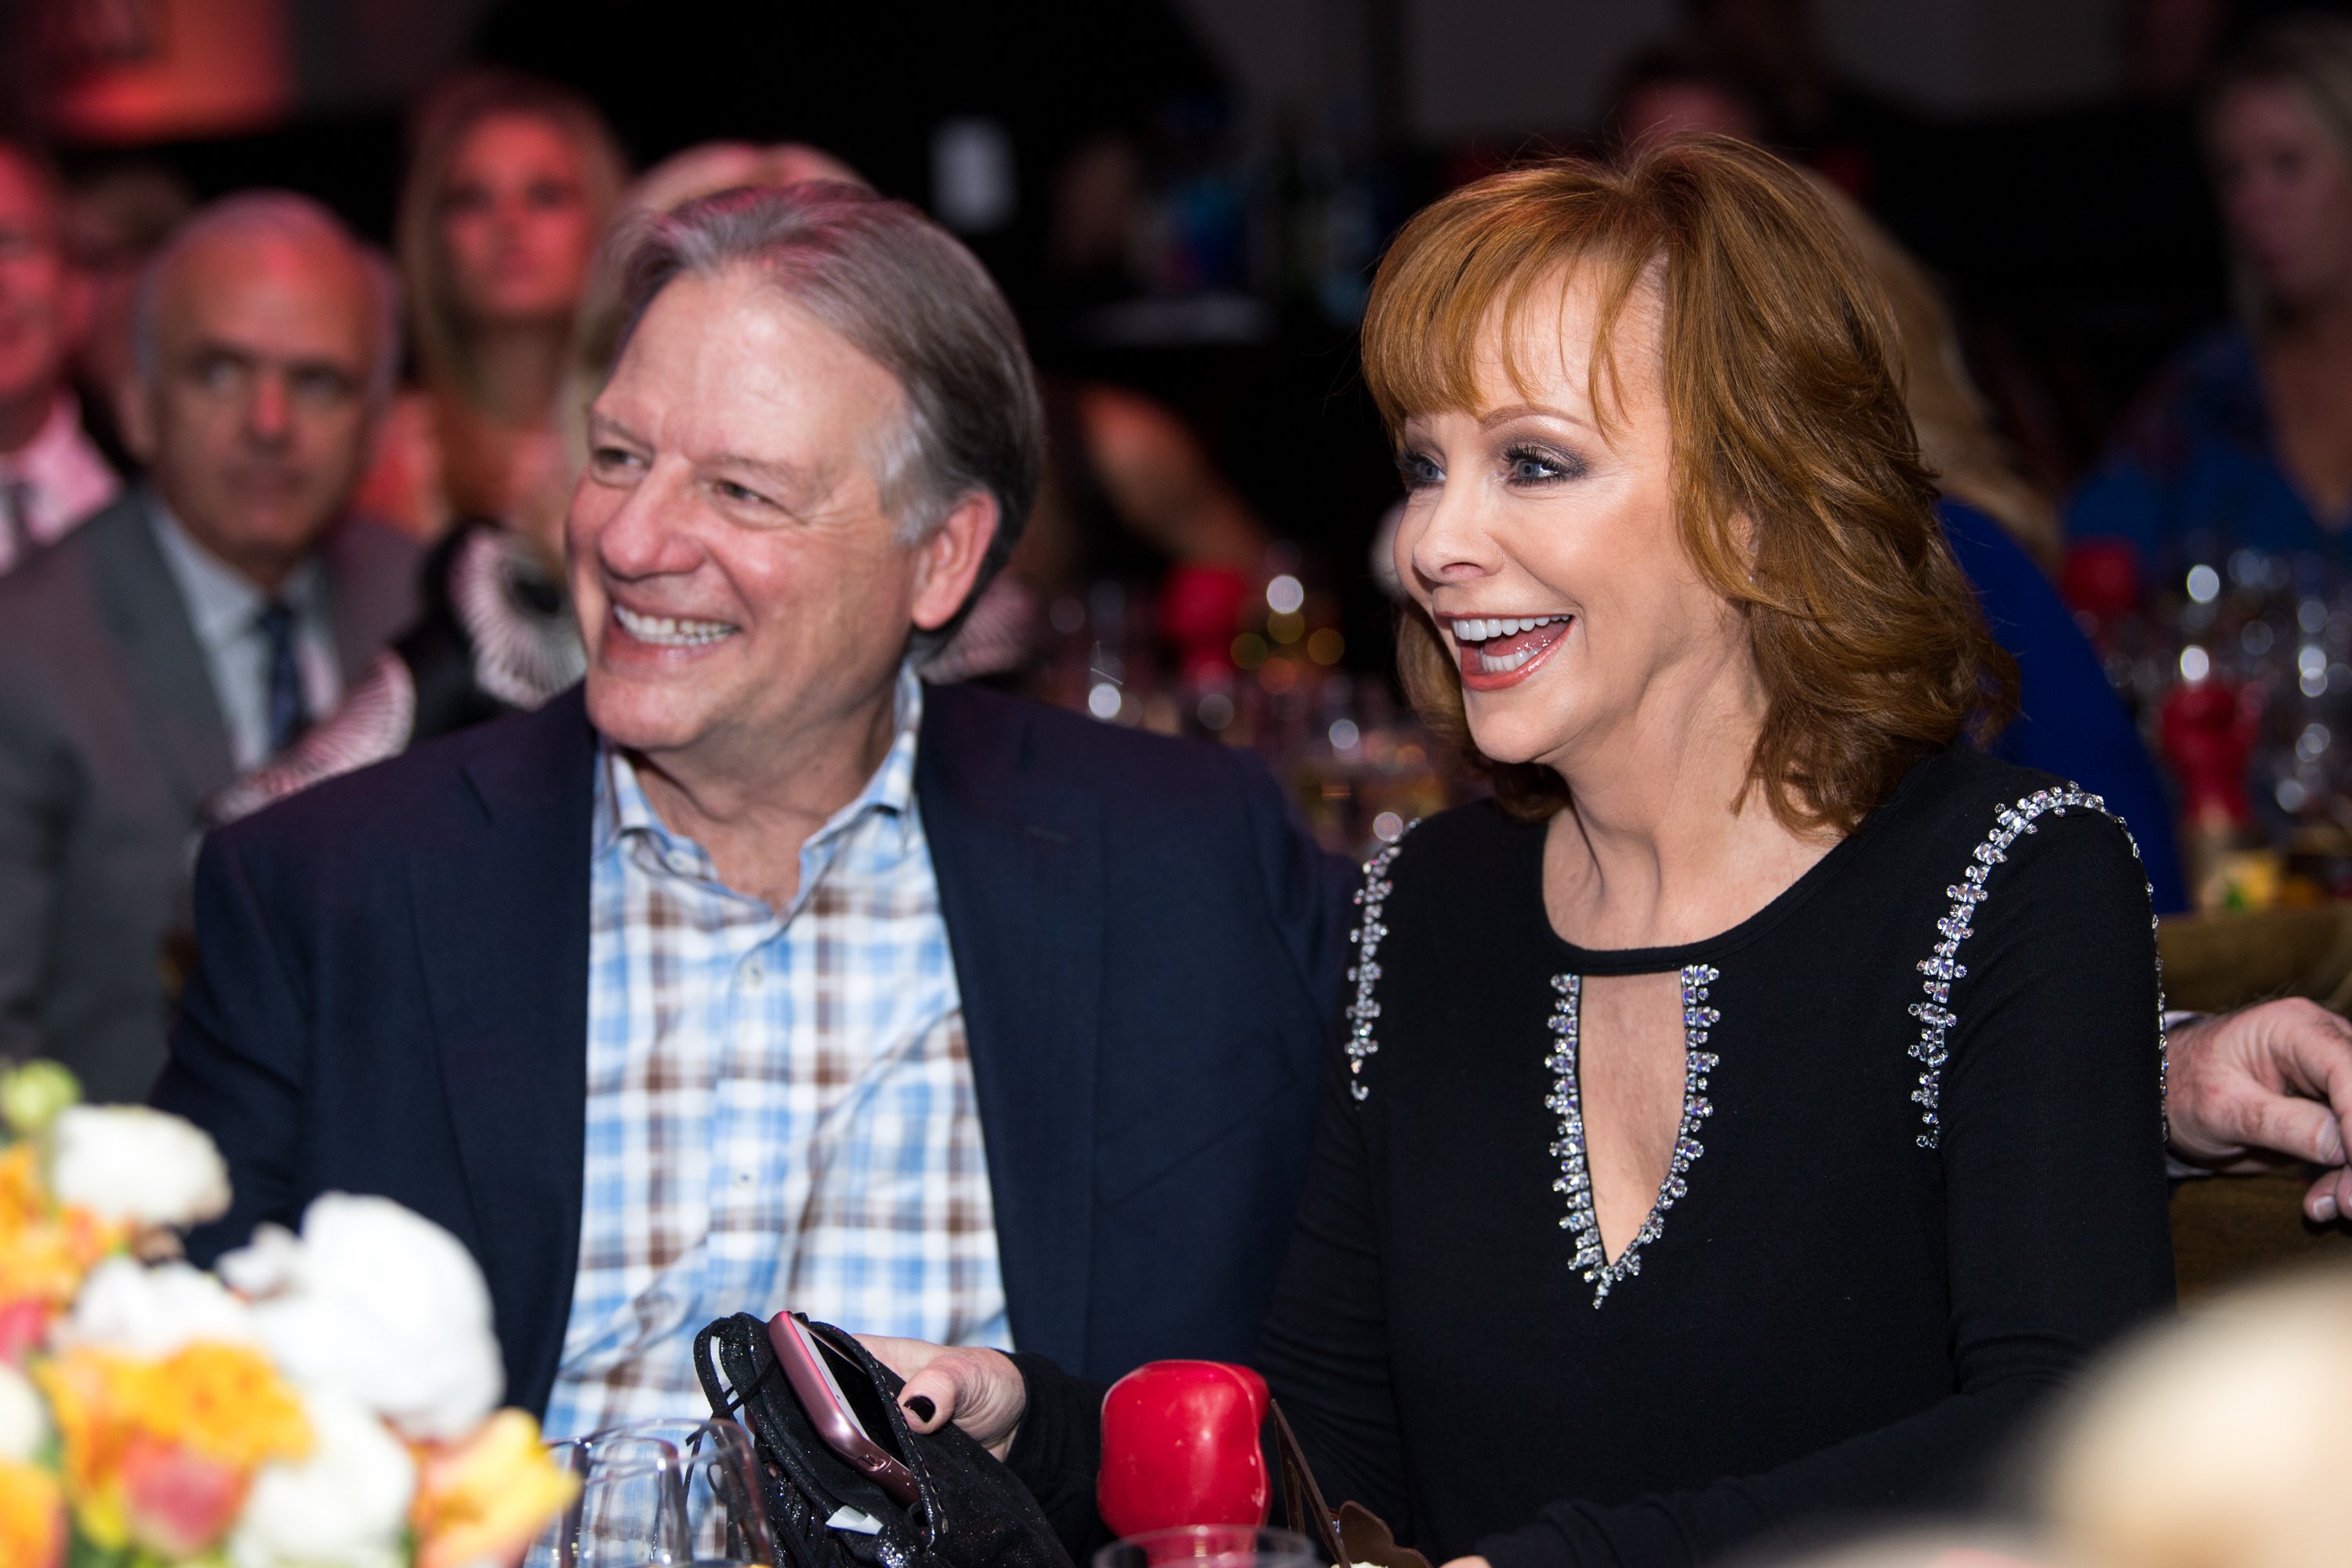 Anthony Lasuzzo (L) and Reba McEntire at the Celebrity Fight Night's Founders Club Dinner on March 9, 2018 | Source: Getty Images